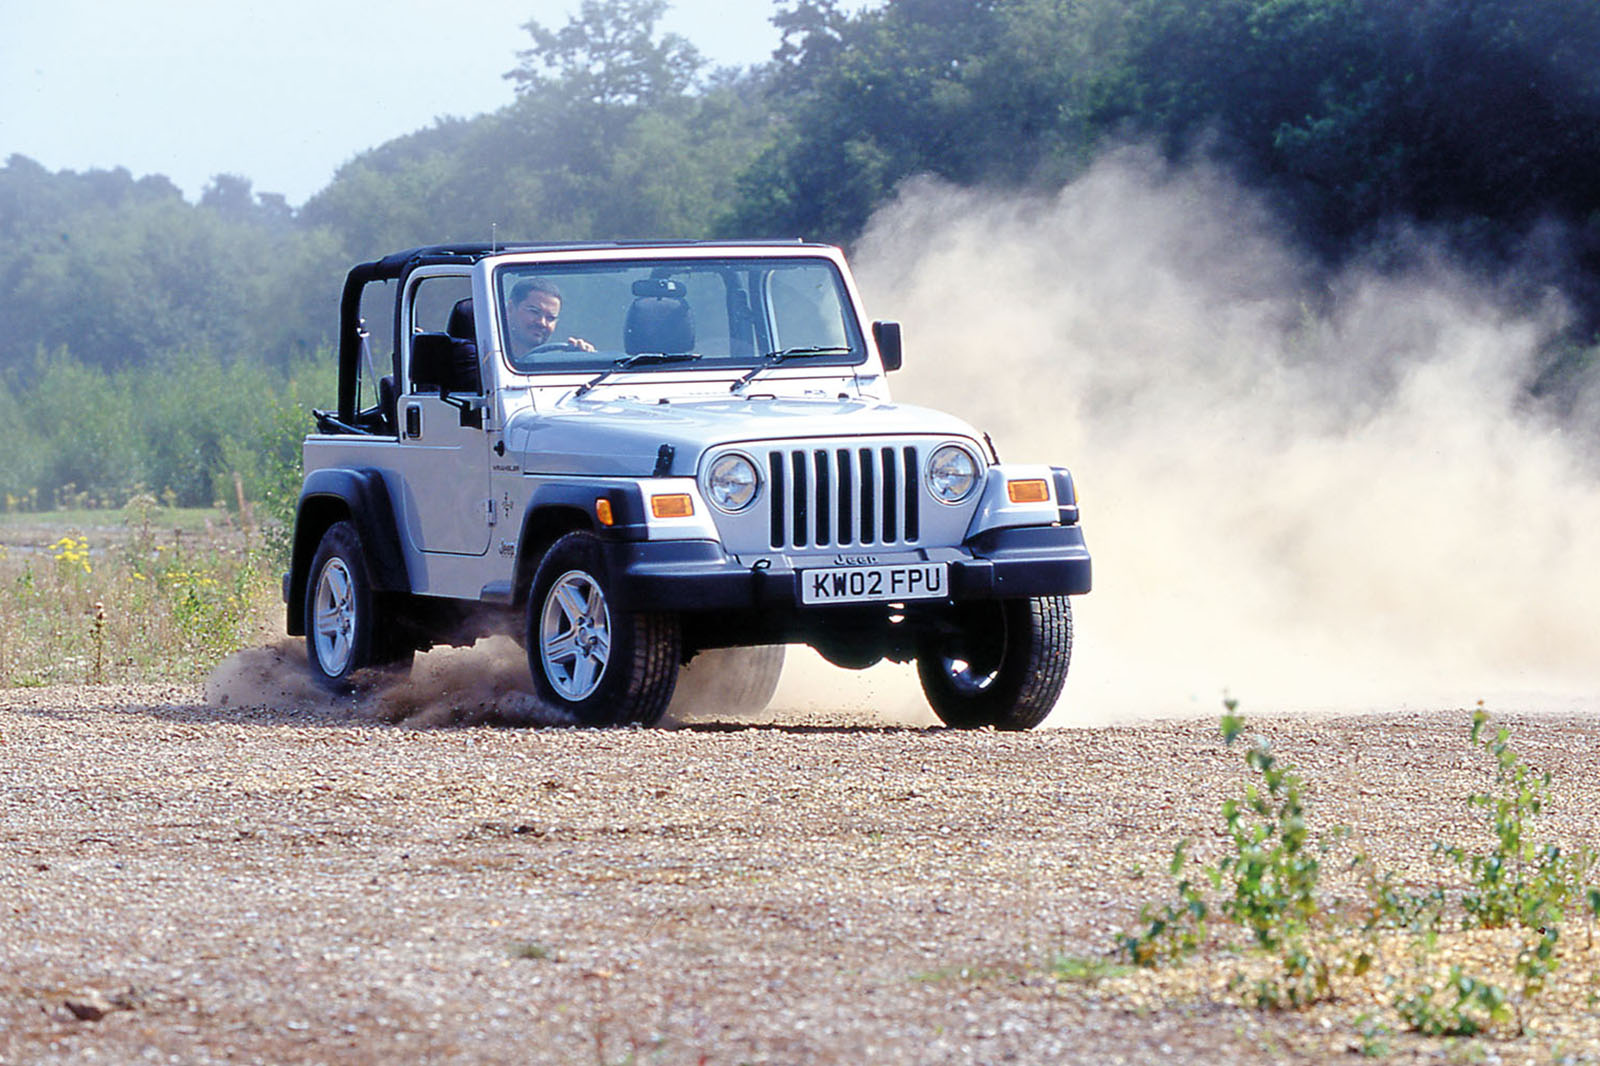 Used car buying guide: Jeep Wrangler